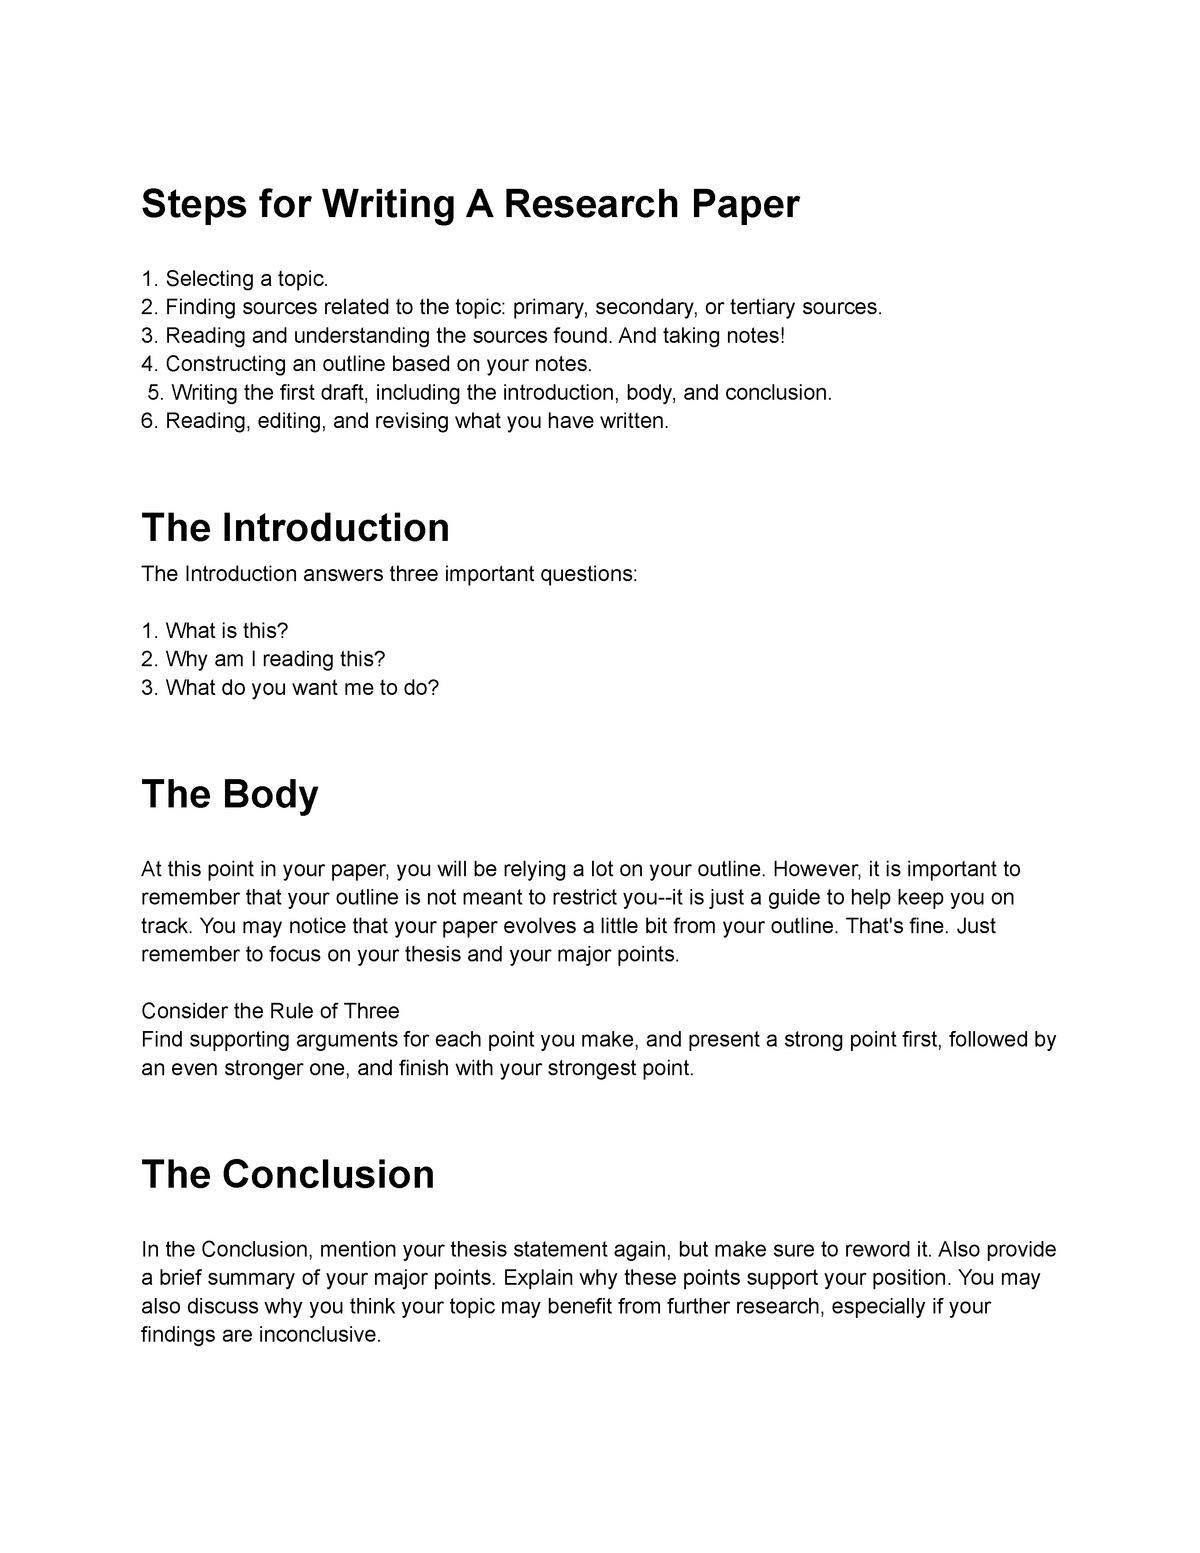 how to make body of research paper